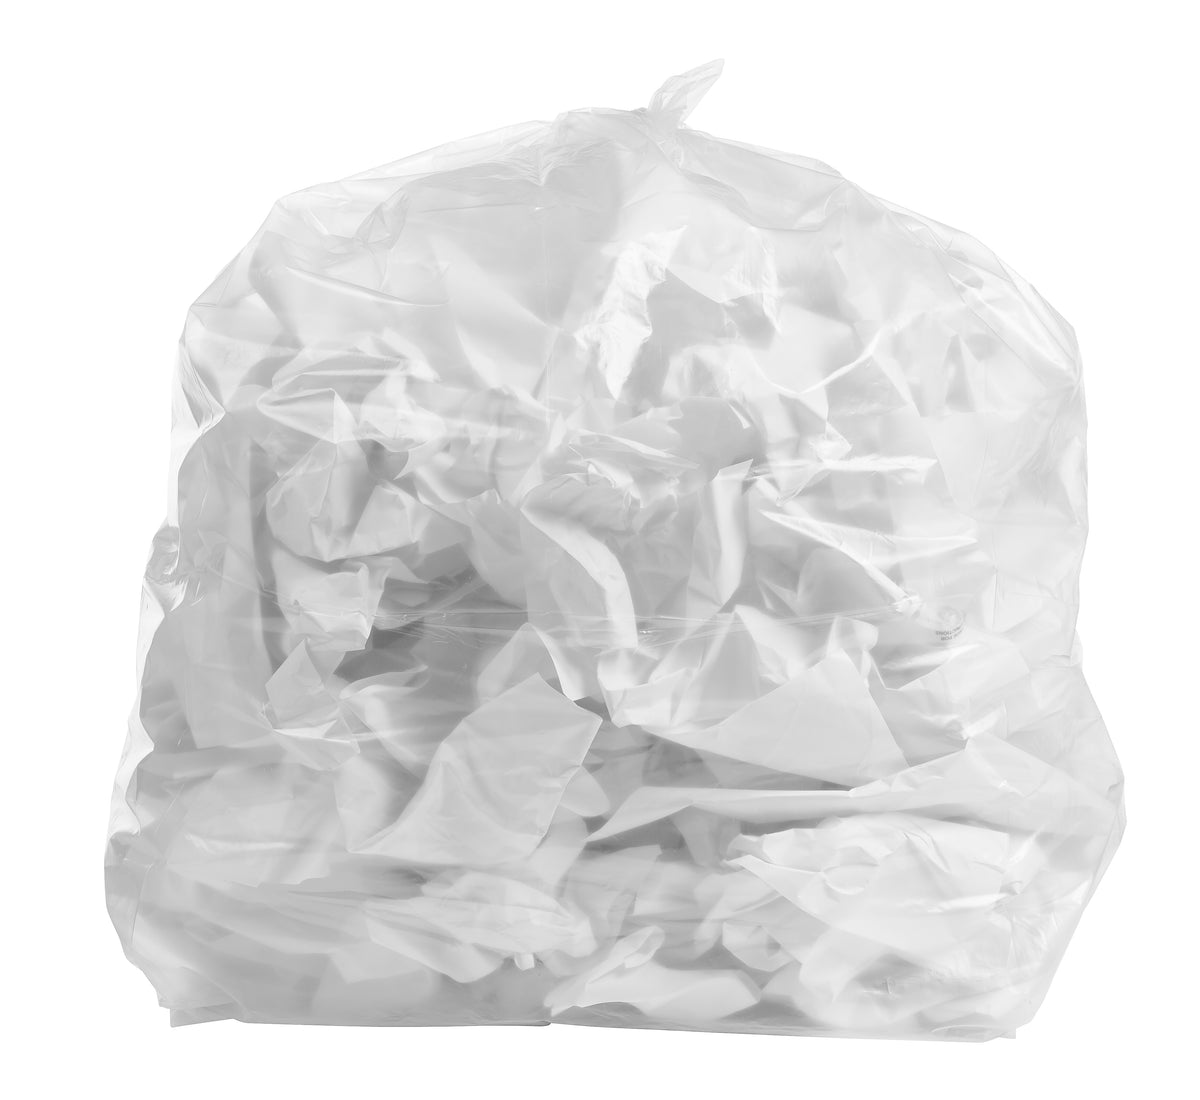 13 Gallon Clear Trash Bags Recycling Can Liners Tall Kitchen Garbage Bags  250 Ct